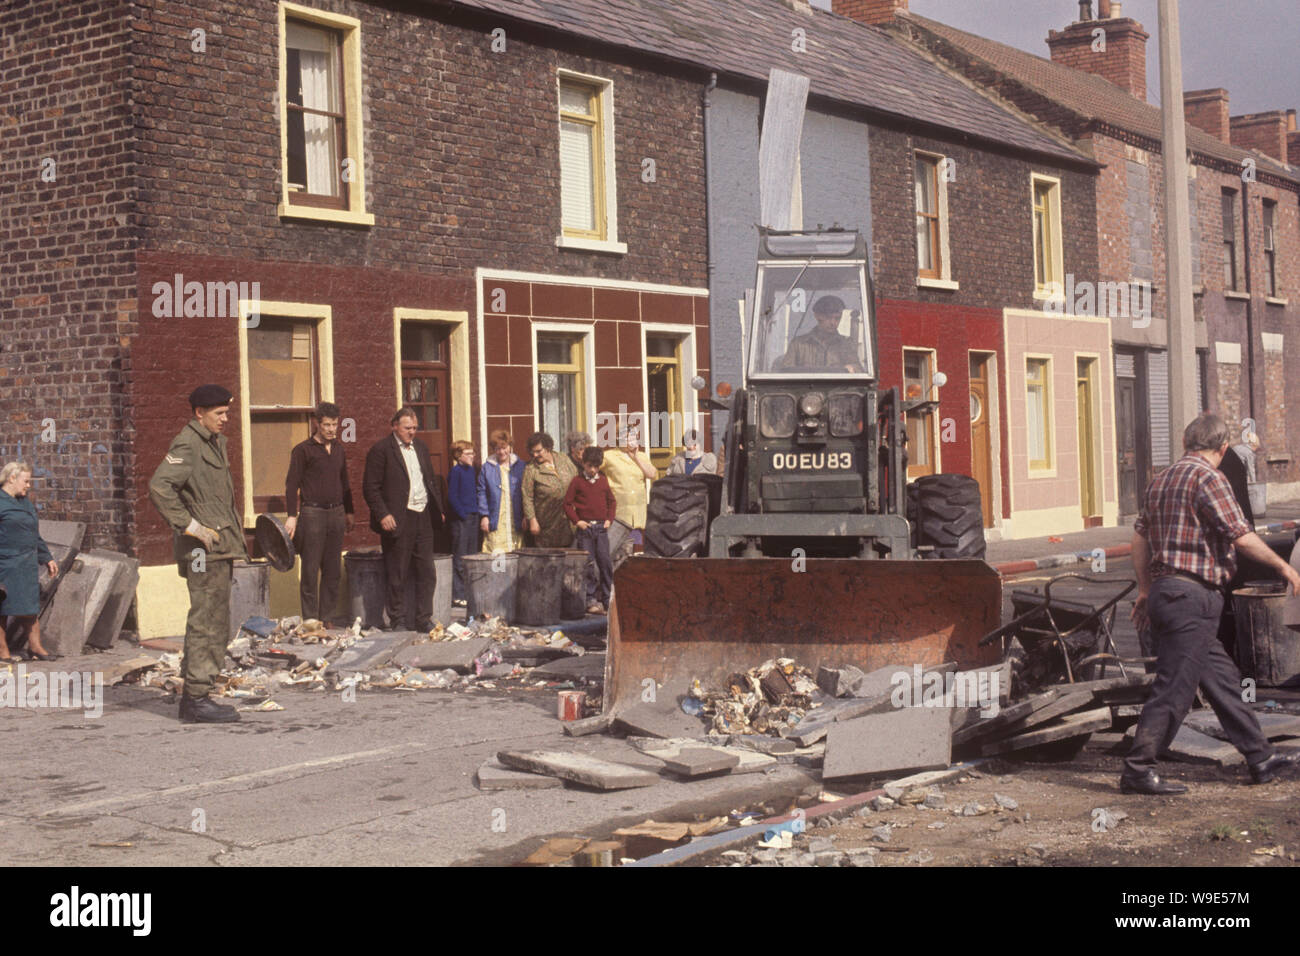 File photo dated August 1969 of an Army bulldozer clearing debris in Argyle Street, Belfast as British troops were deployed onto the streets of Northern Ireland as part of Operation Banner in response to growing sectarian unrest. Stock Photo